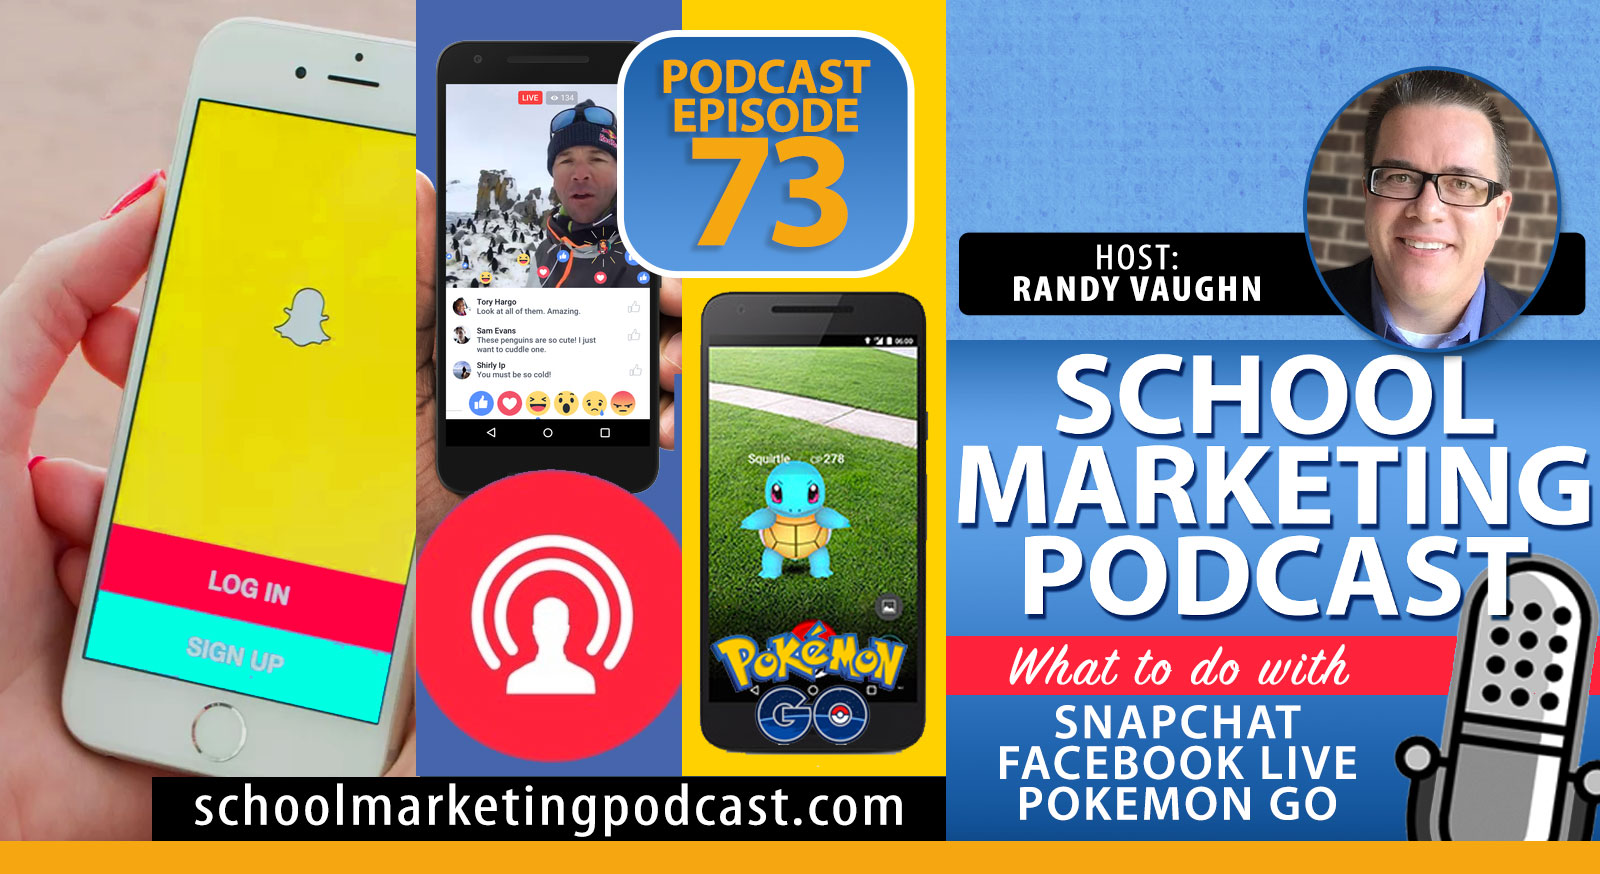 What to do with Pokemon Go, Snapchat and Facebook Live (School Marketing Podcast #73)